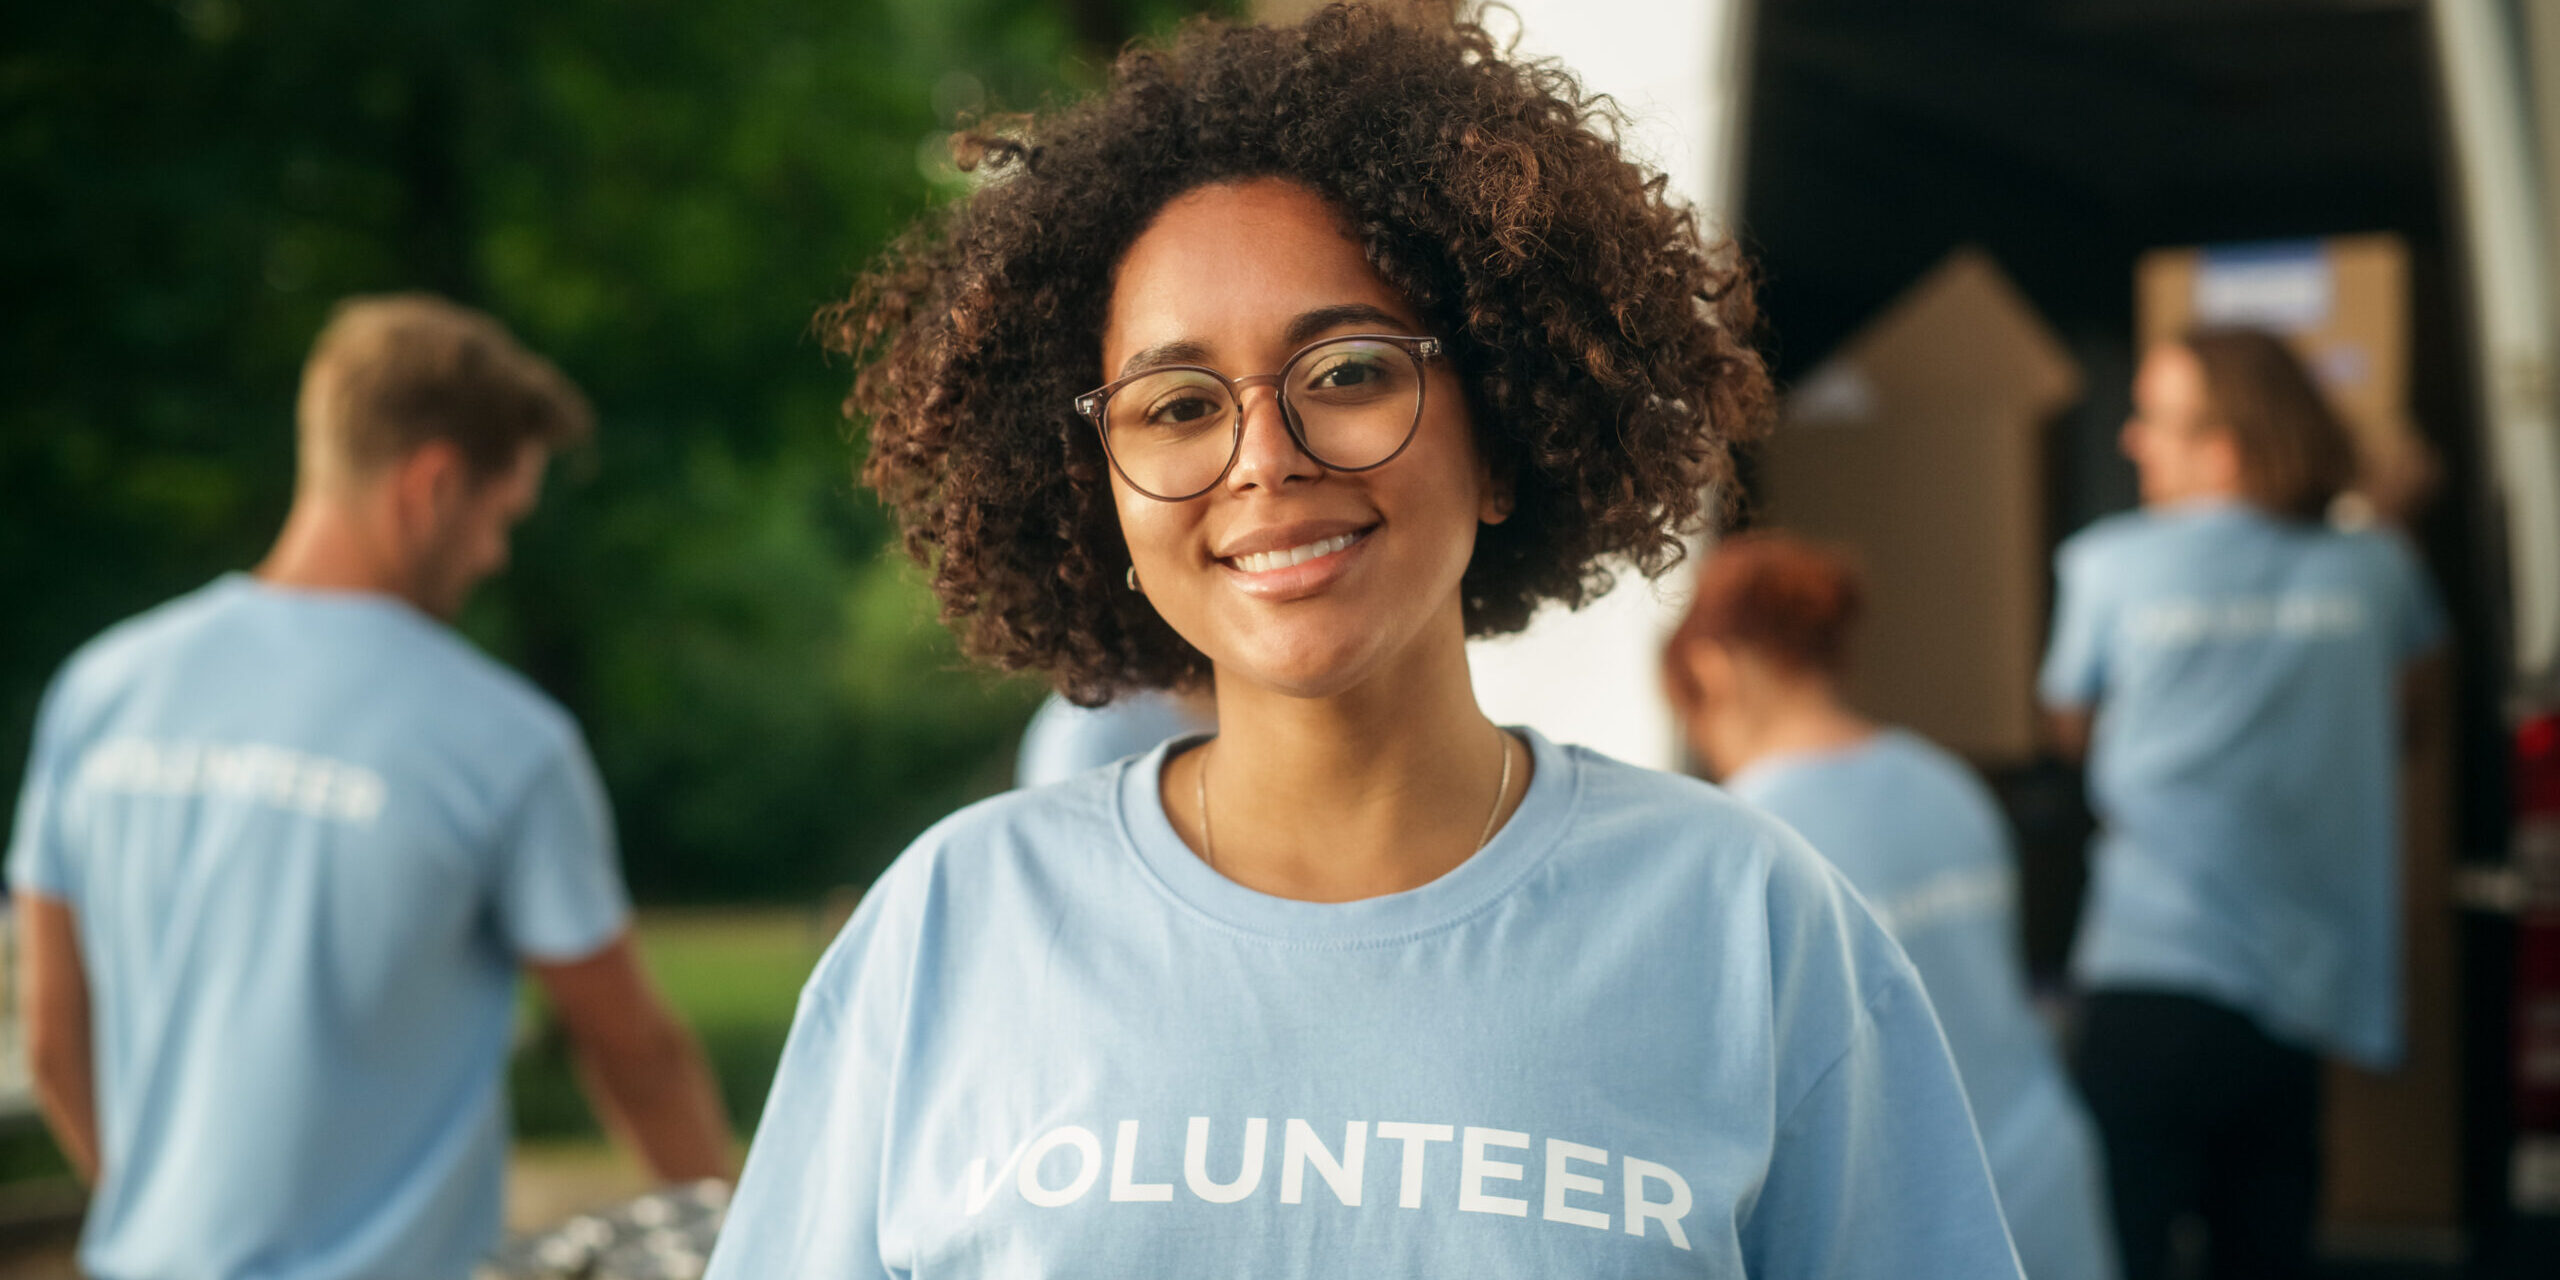 Young Adult Multiethnic Latina with Afro Hair, Wearing Glasses, Smiling, Wearing a shirt that says volunteer and Posing for Camera.